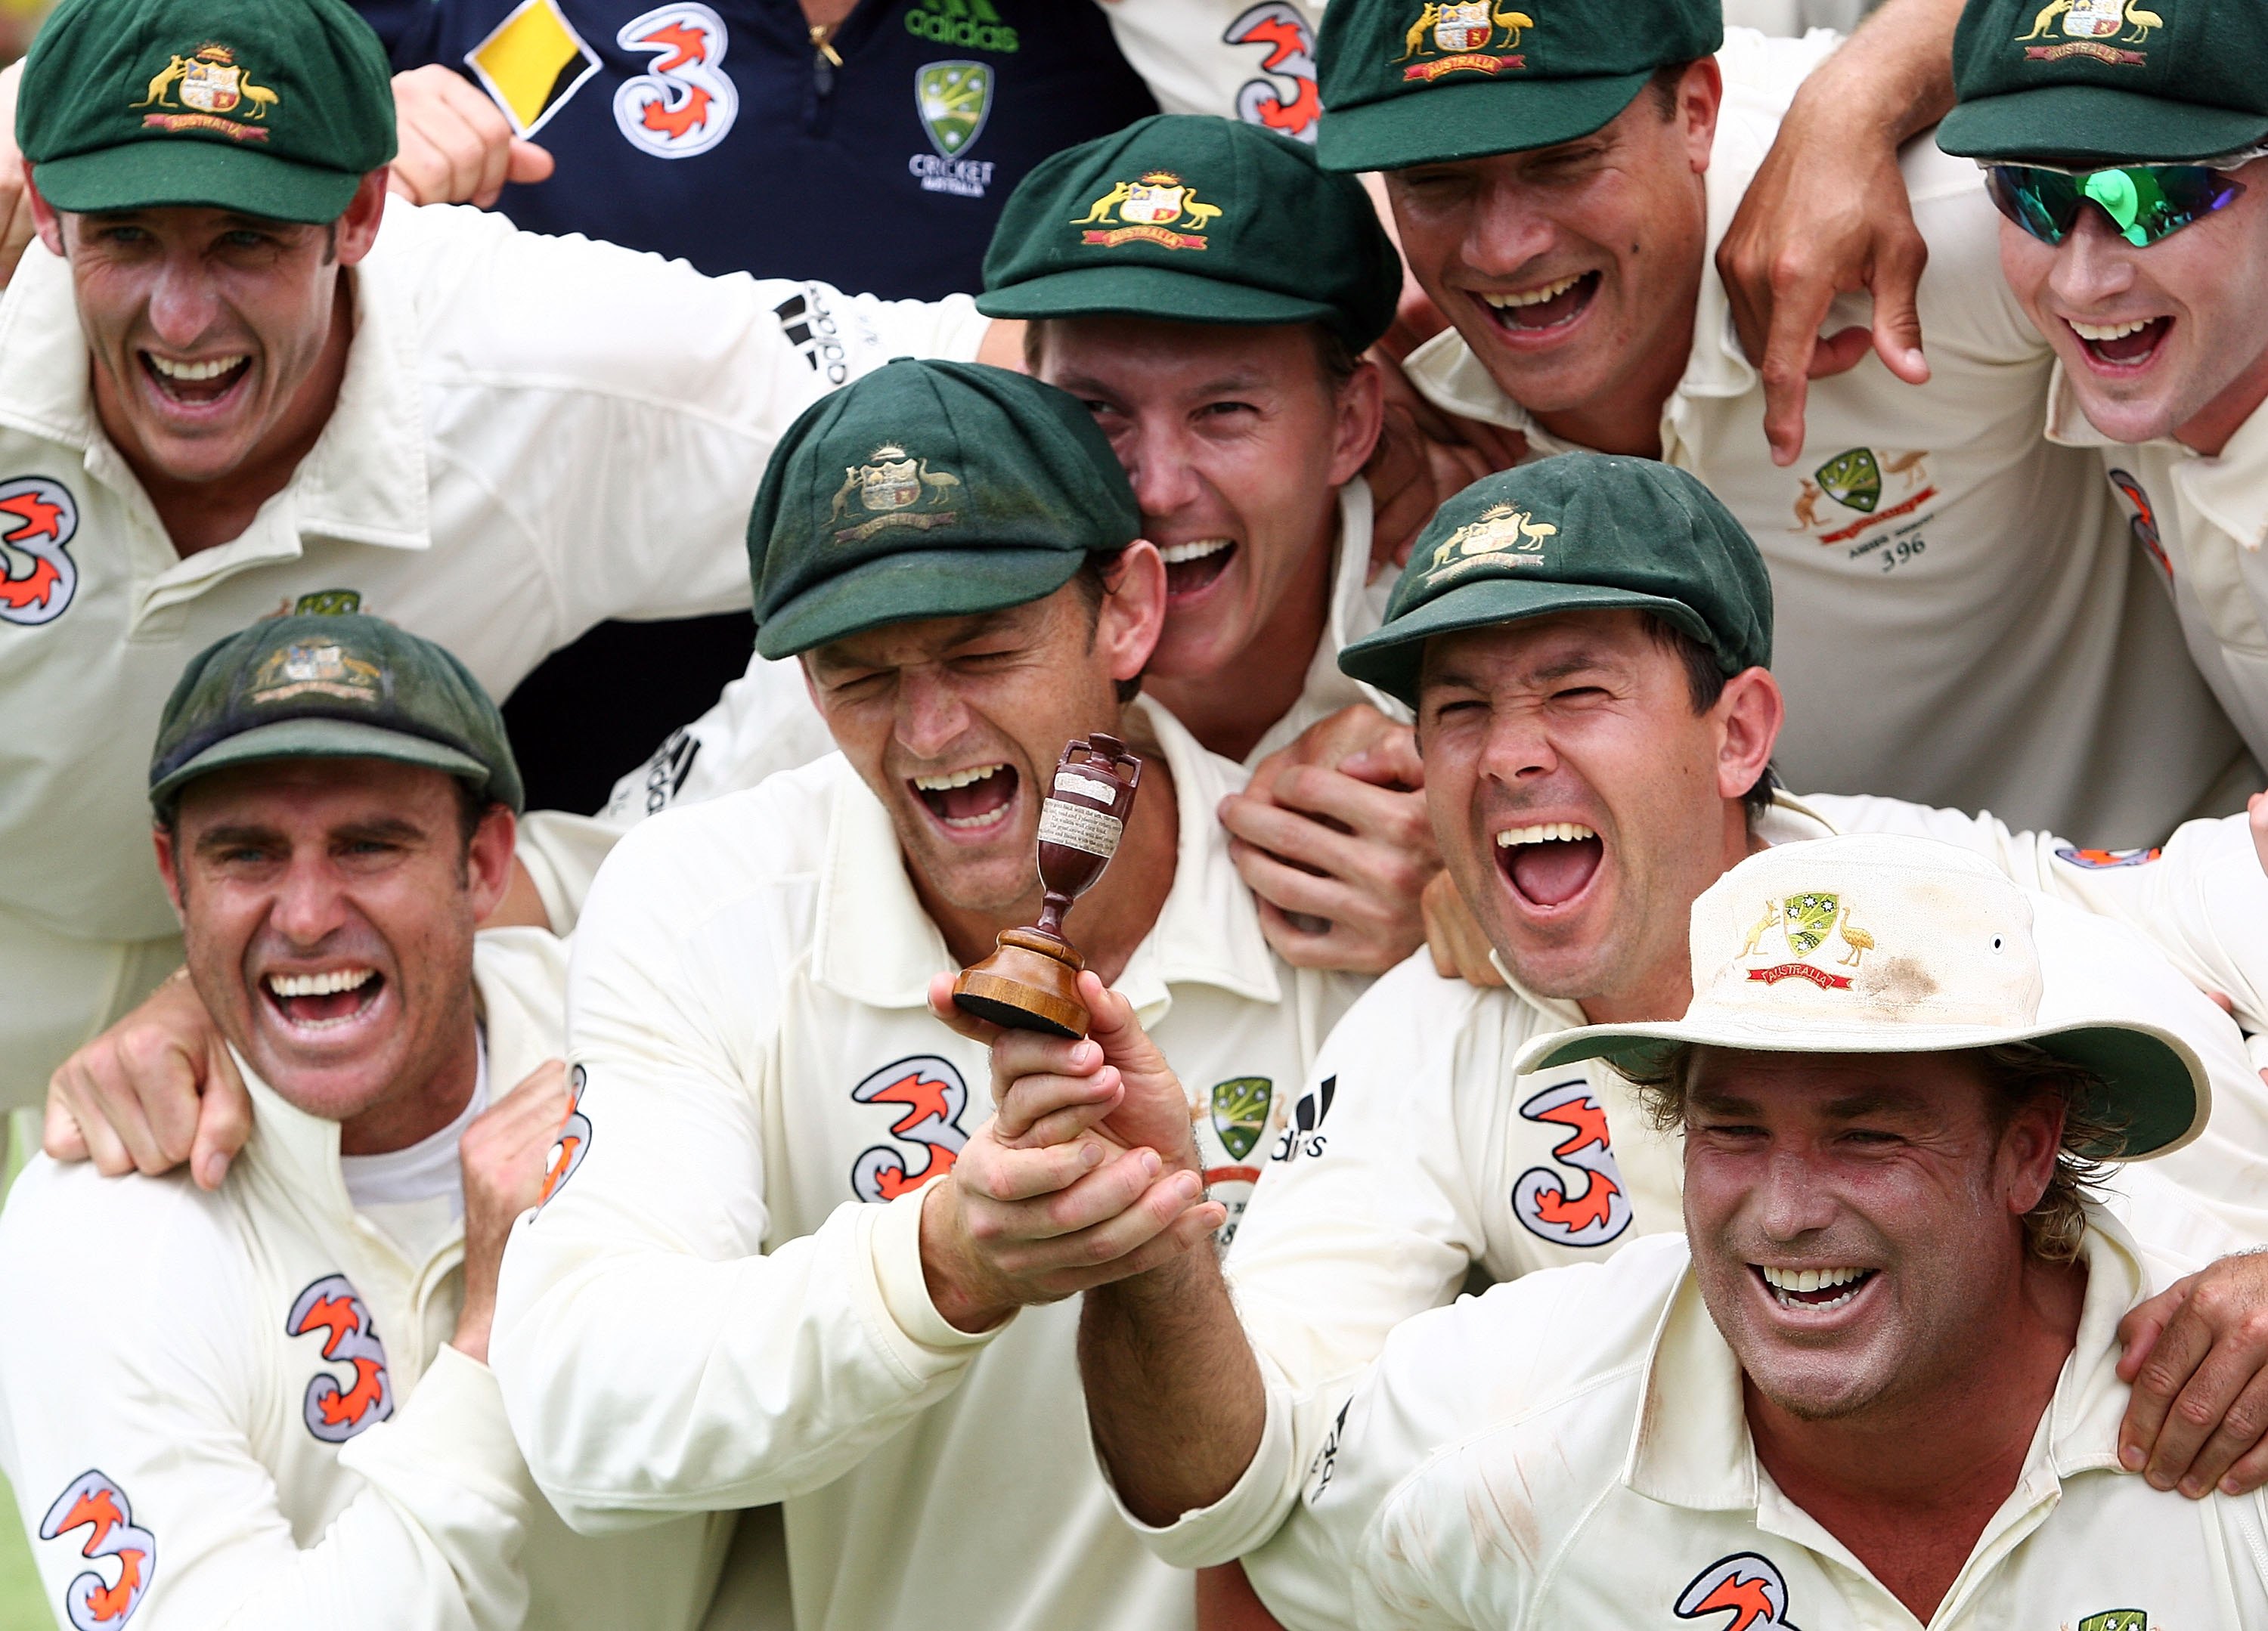 The Aussies toasted various successes there, including several Ashes wins